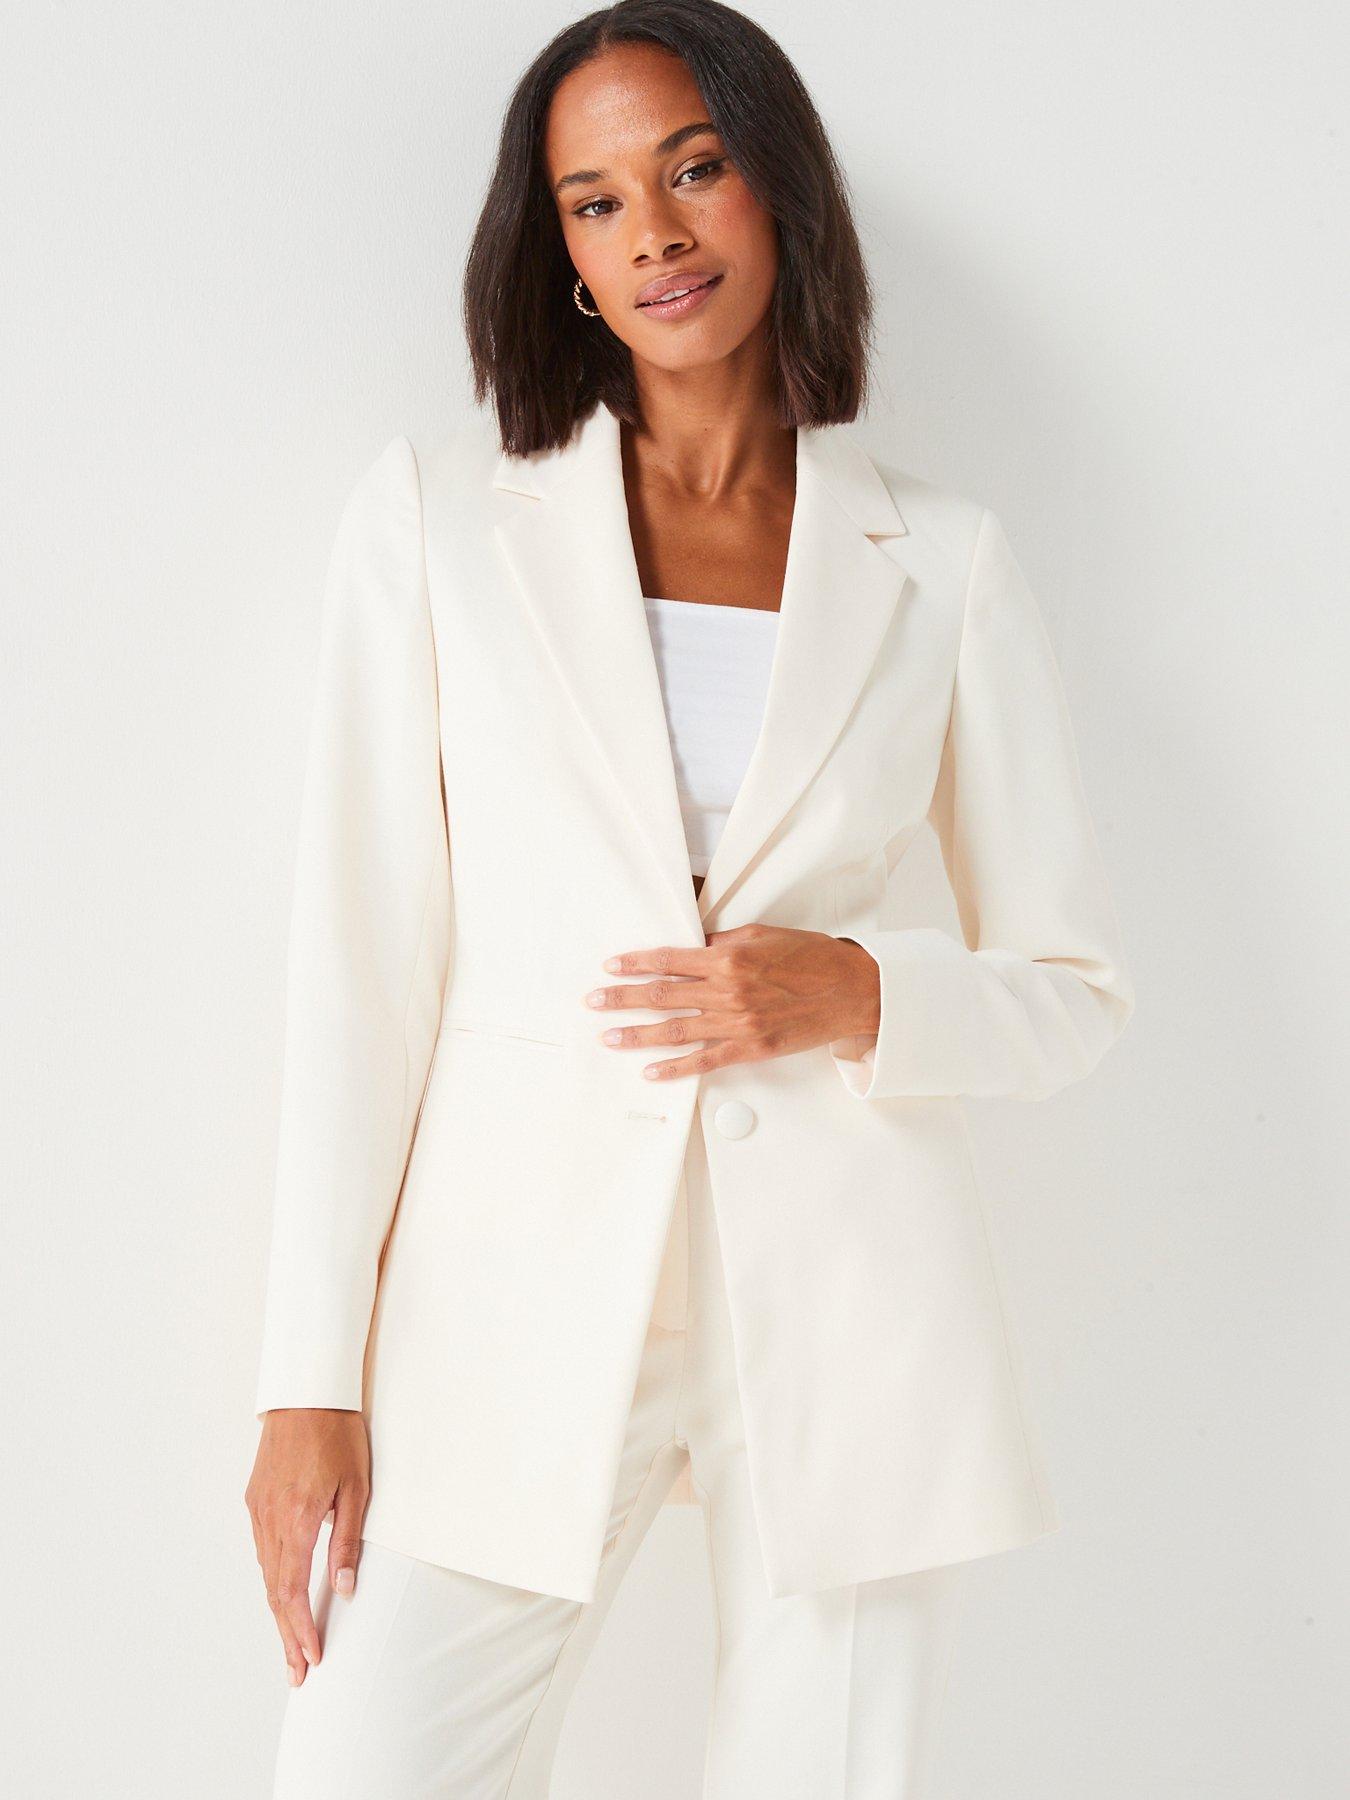 Tailored Formal Jackets For Women For Formal Office And Business Wear  Spring/Autumn Collection Solid Color From Cozycomfy21, $20.75 | DHgate.Com